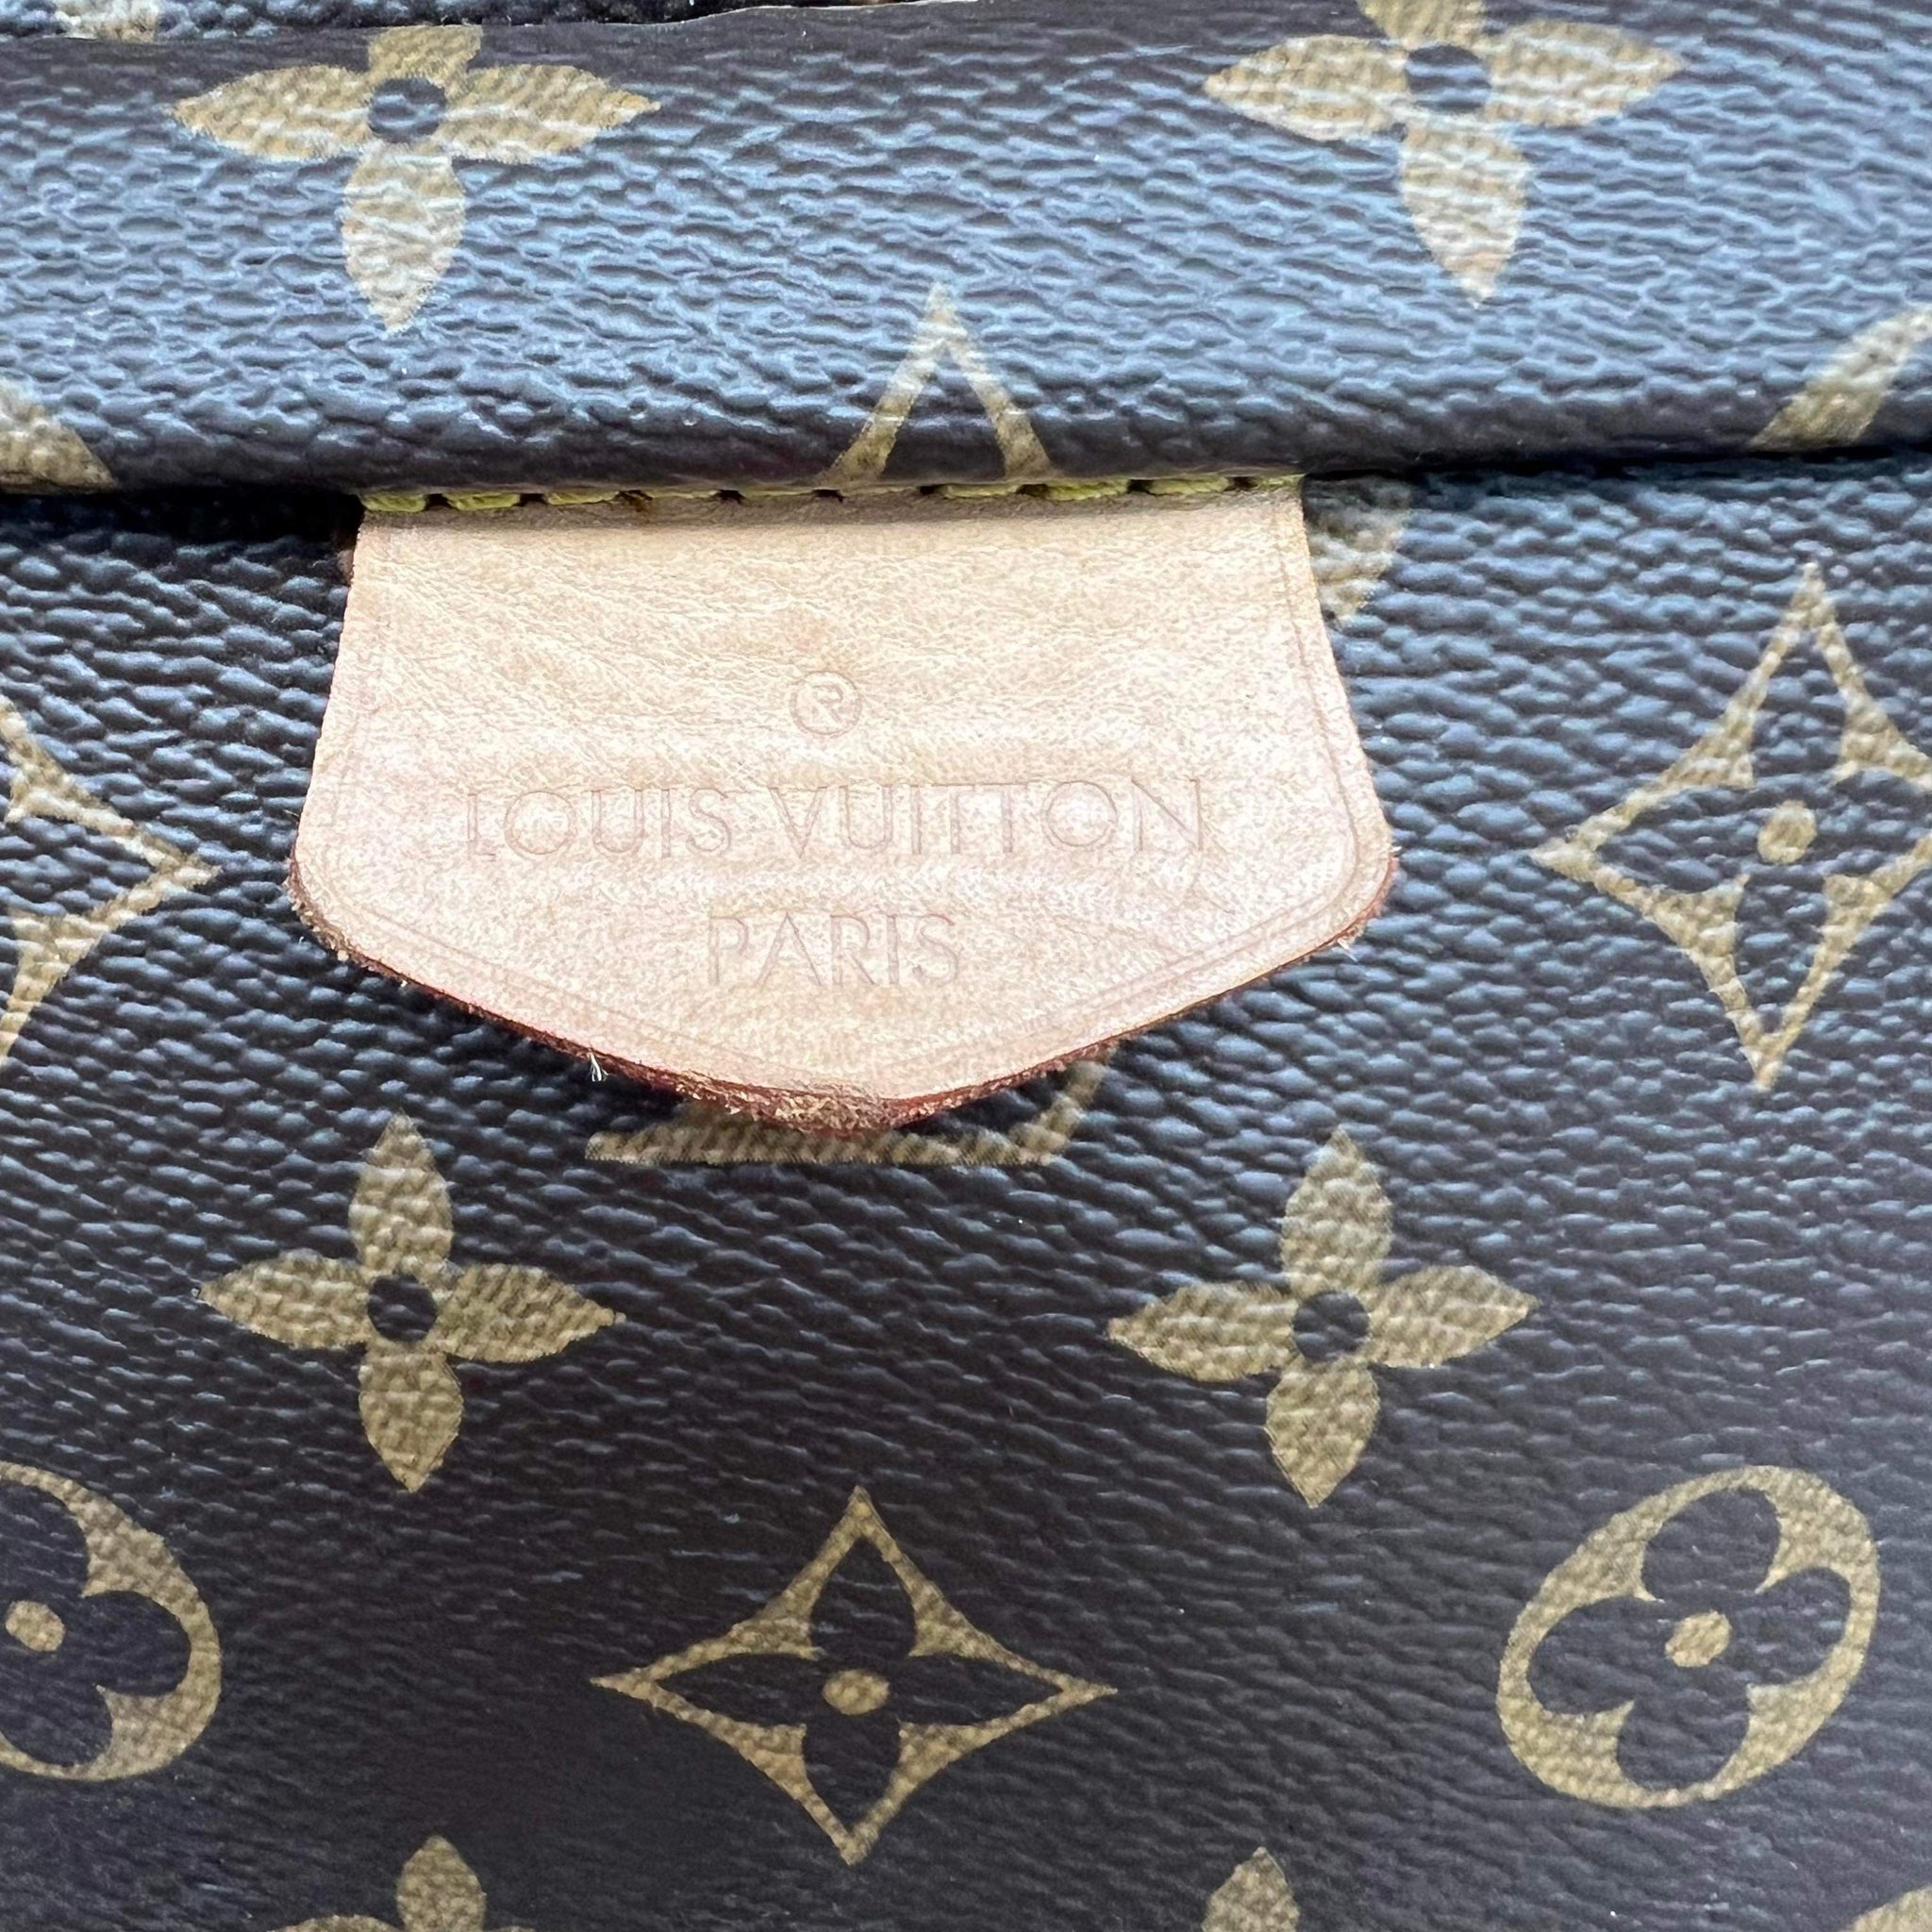 LV bumbag with charm tacky or cool personalization